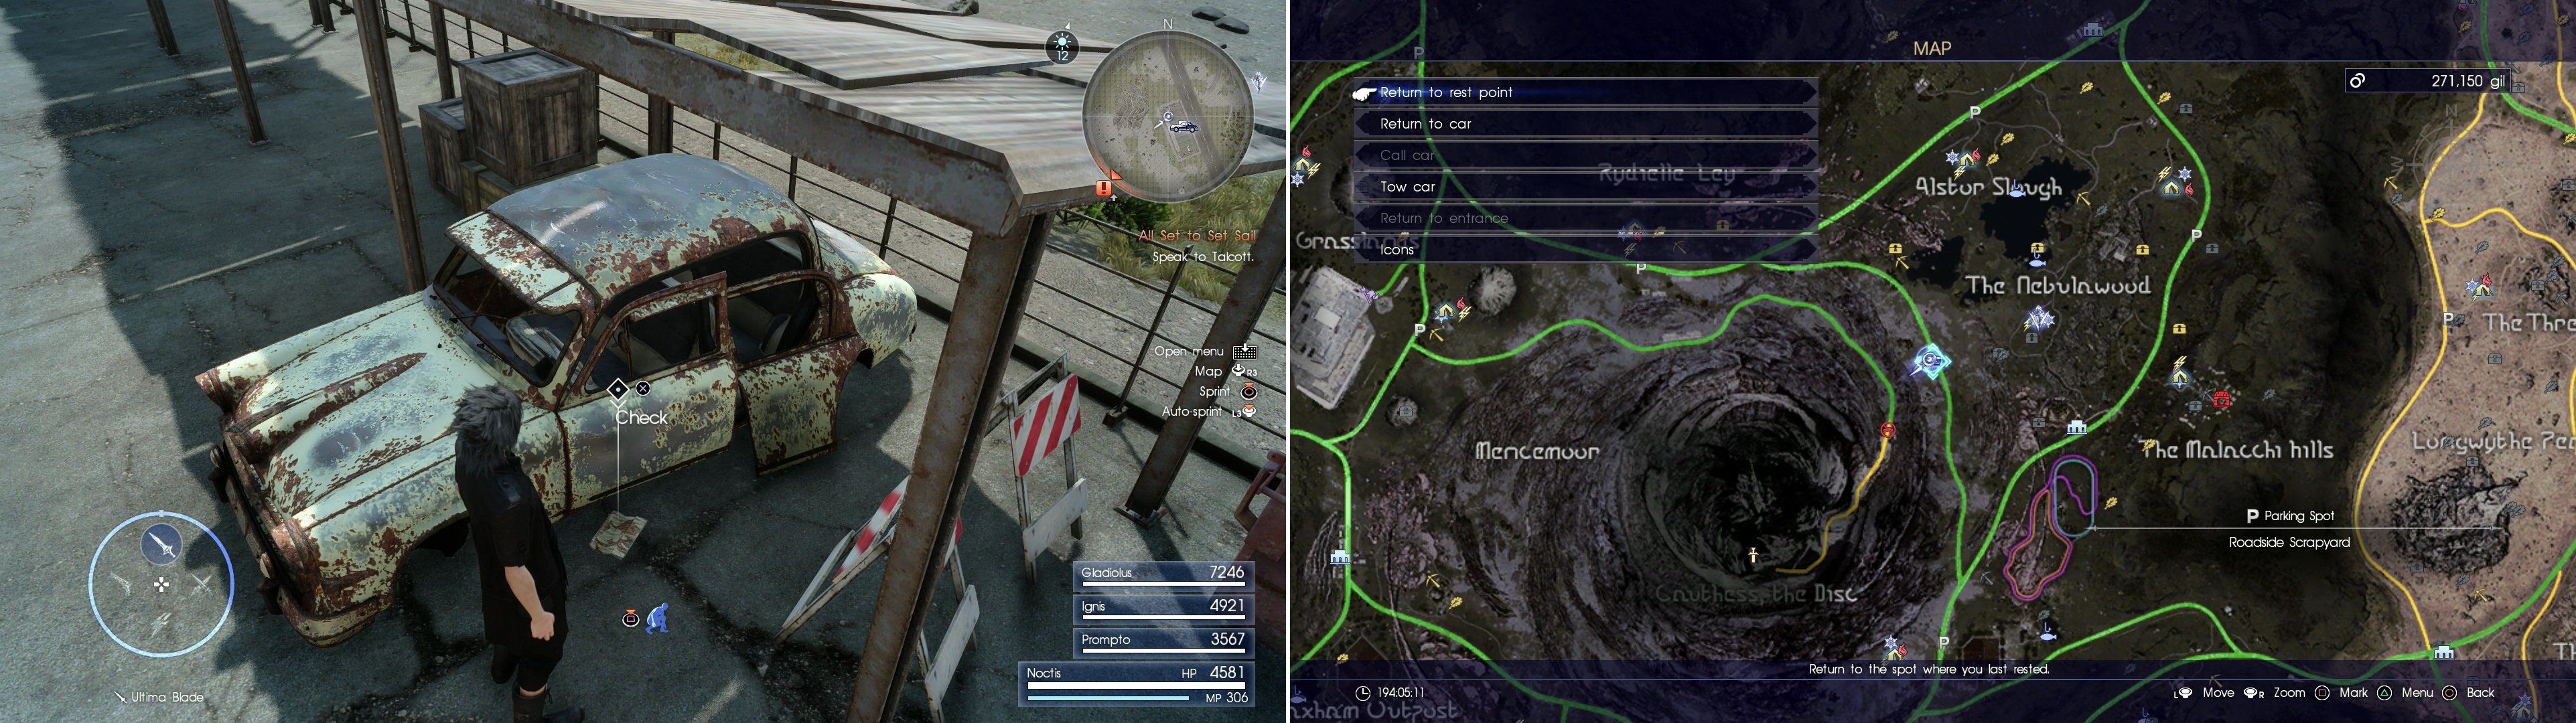 You'll find Mystery Map VI near a broke-down car (left) at the Roadside Scrapyard Parking Spot (right).